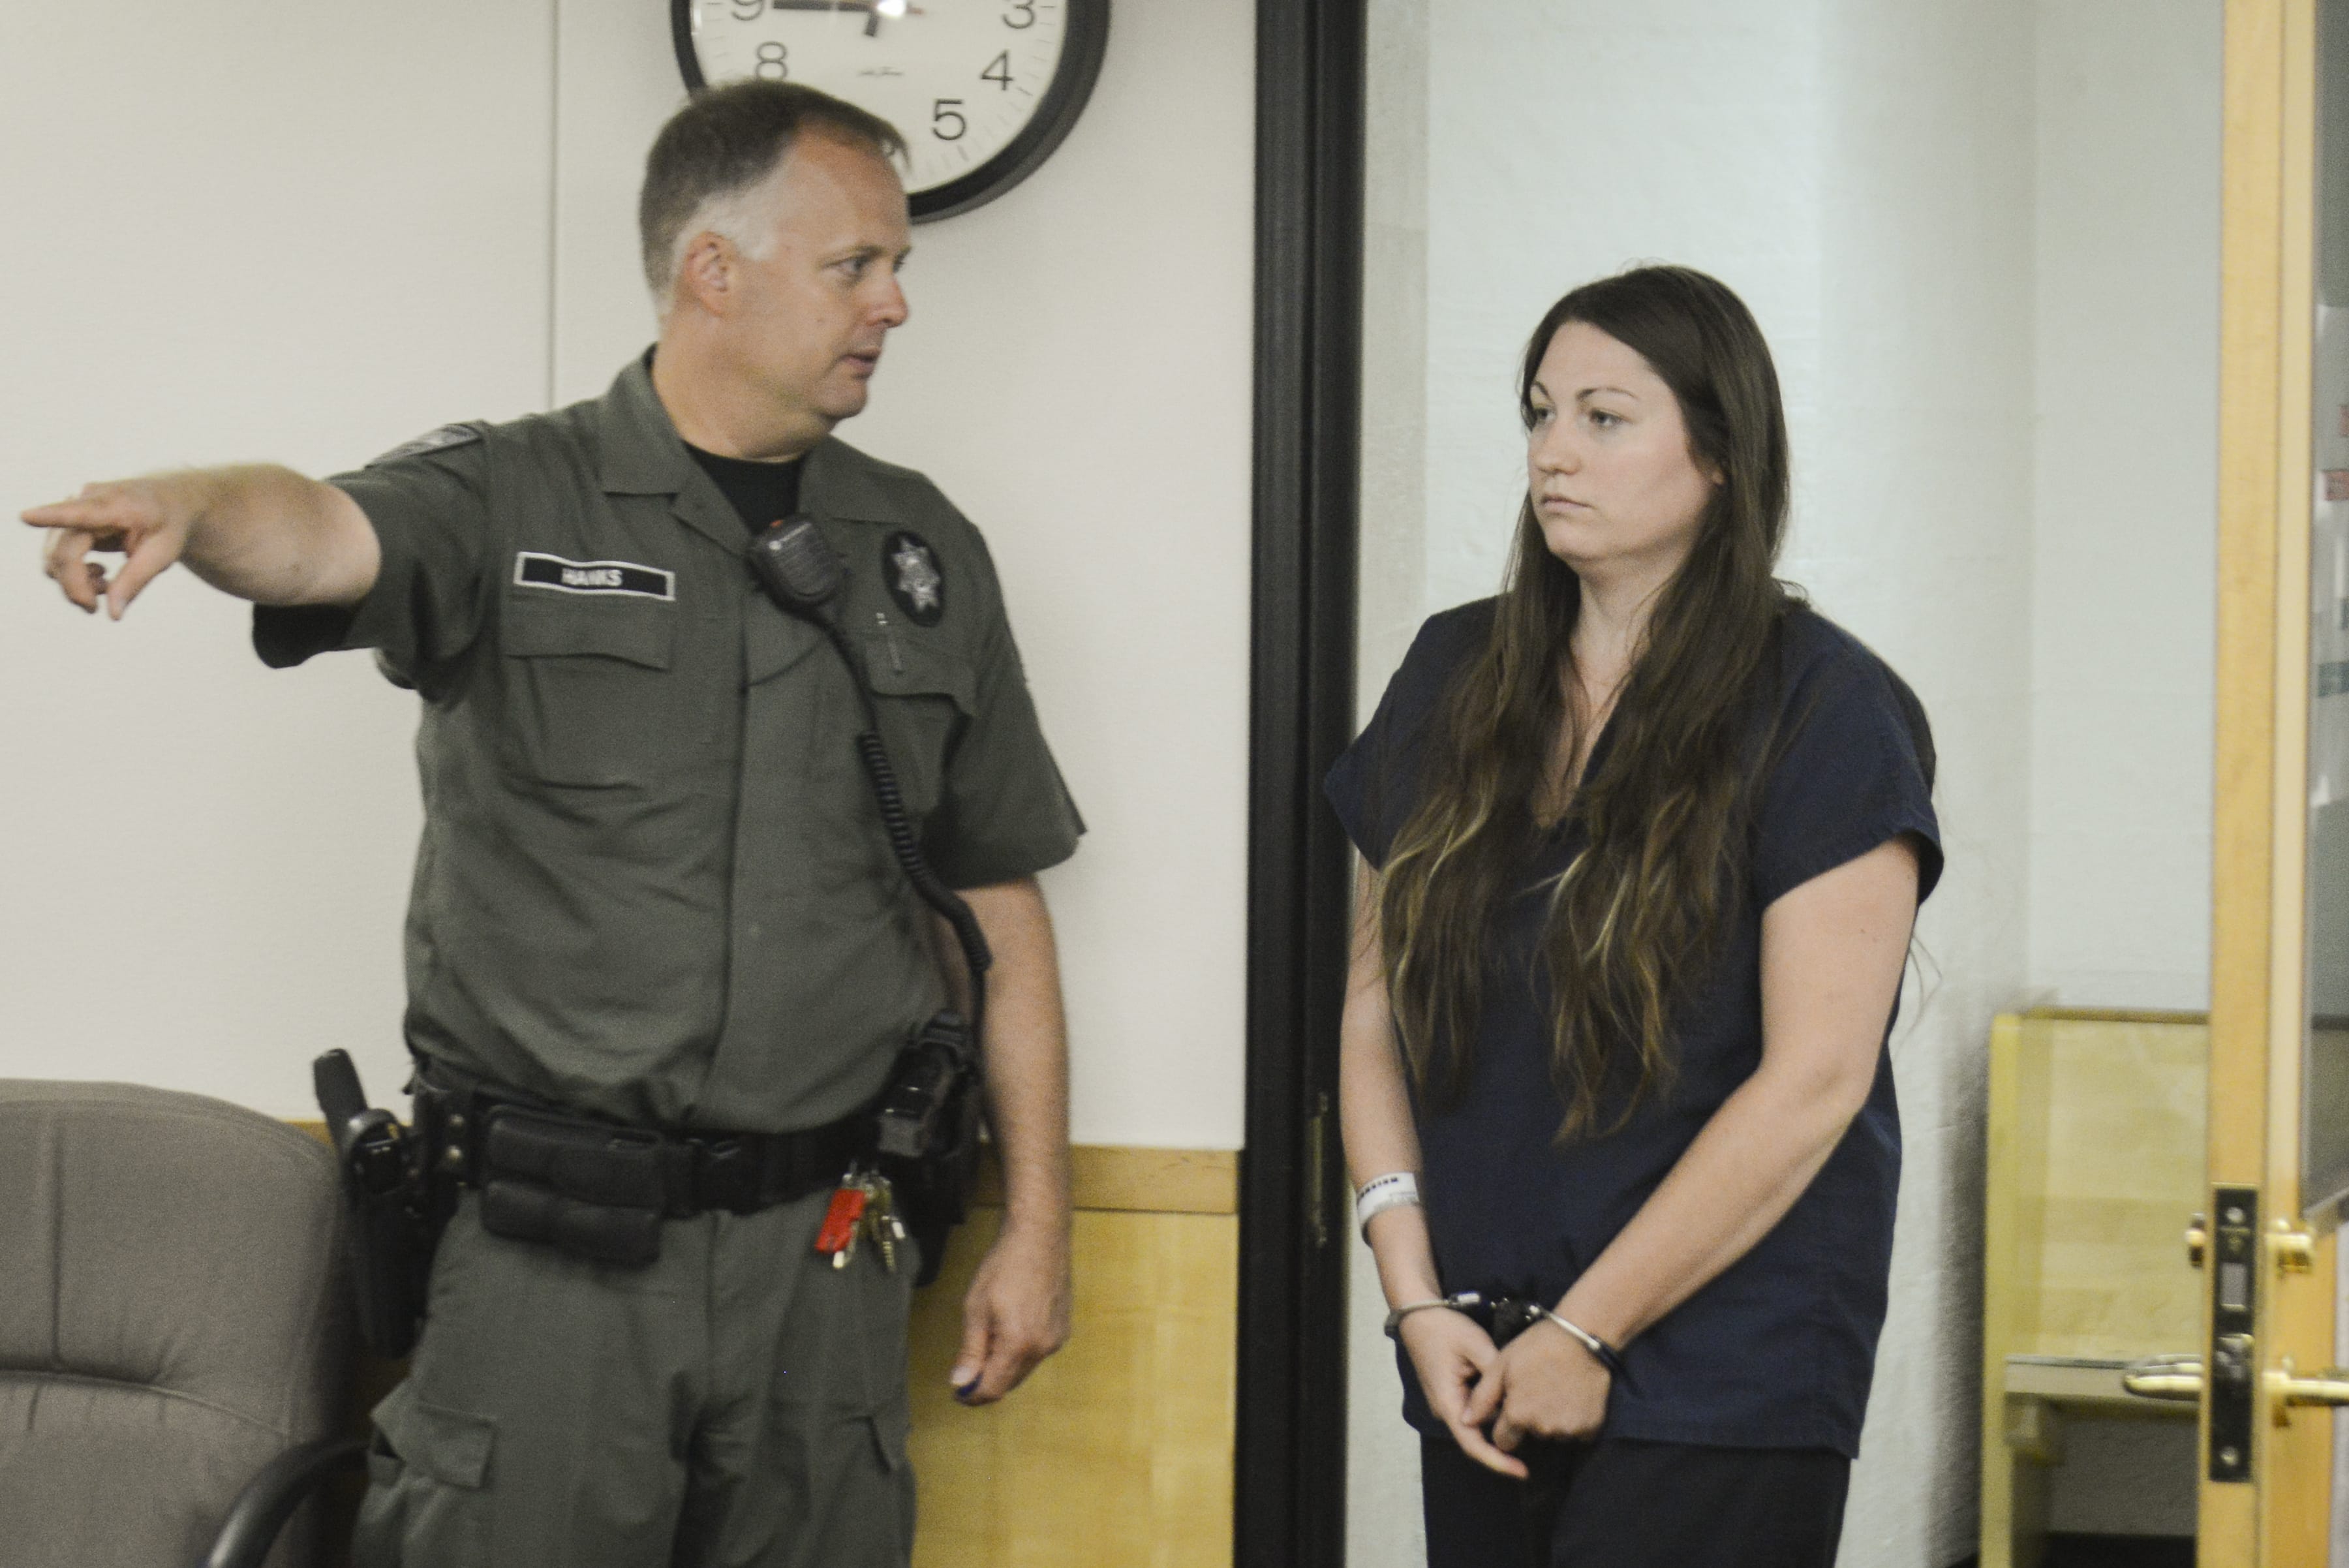 Andrea Sibley, the girlfriend of Brent Ward Luyster, the man suspected in a triple homicide in Woodland, makes a first appearance Friday, July 22, 2016, in Clark County Superior Court on suspicion of first-degree rendering criminal assistance. Sibley was arraigned on the charge Monday.